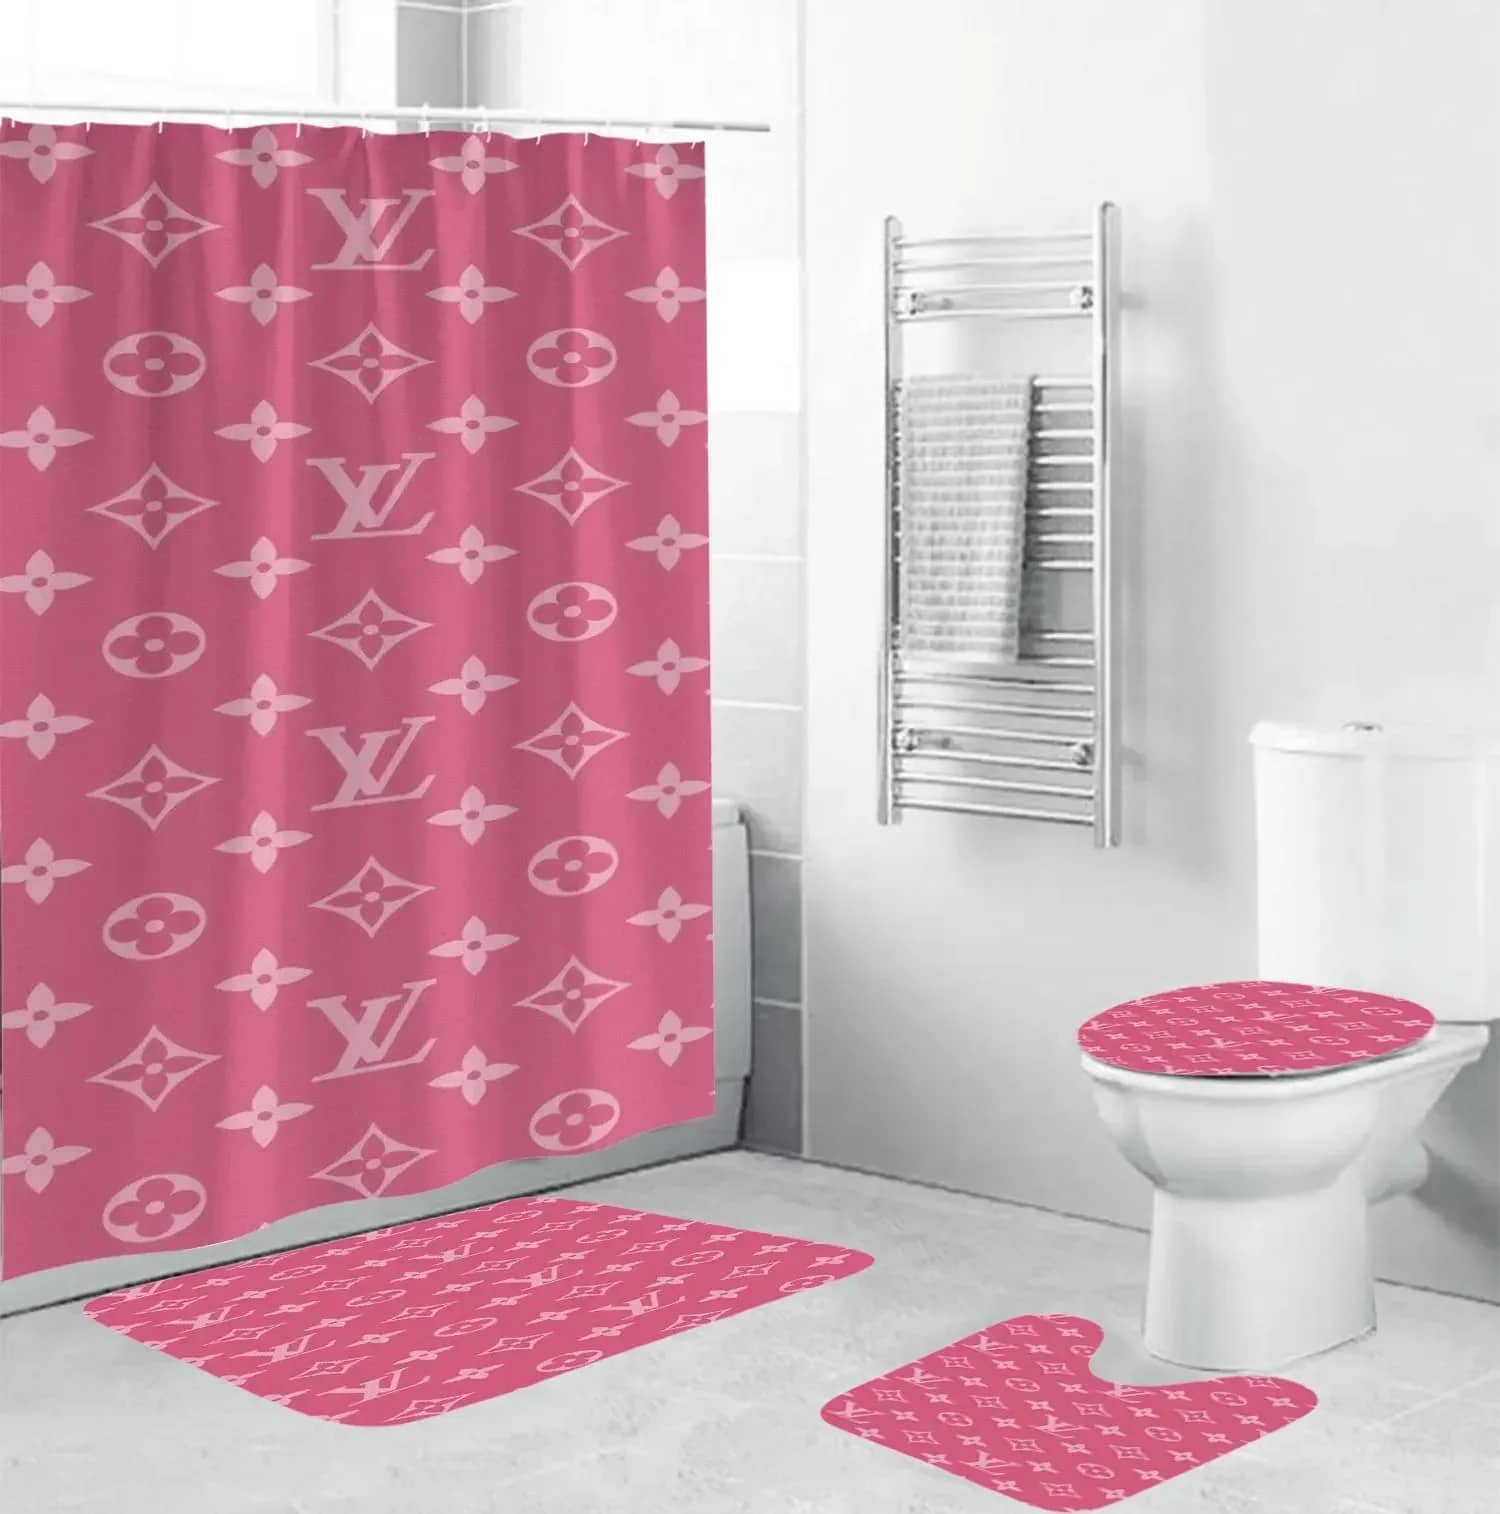 Louis Vuitton Pinky Luxury Brand Limited Bathroom Sets